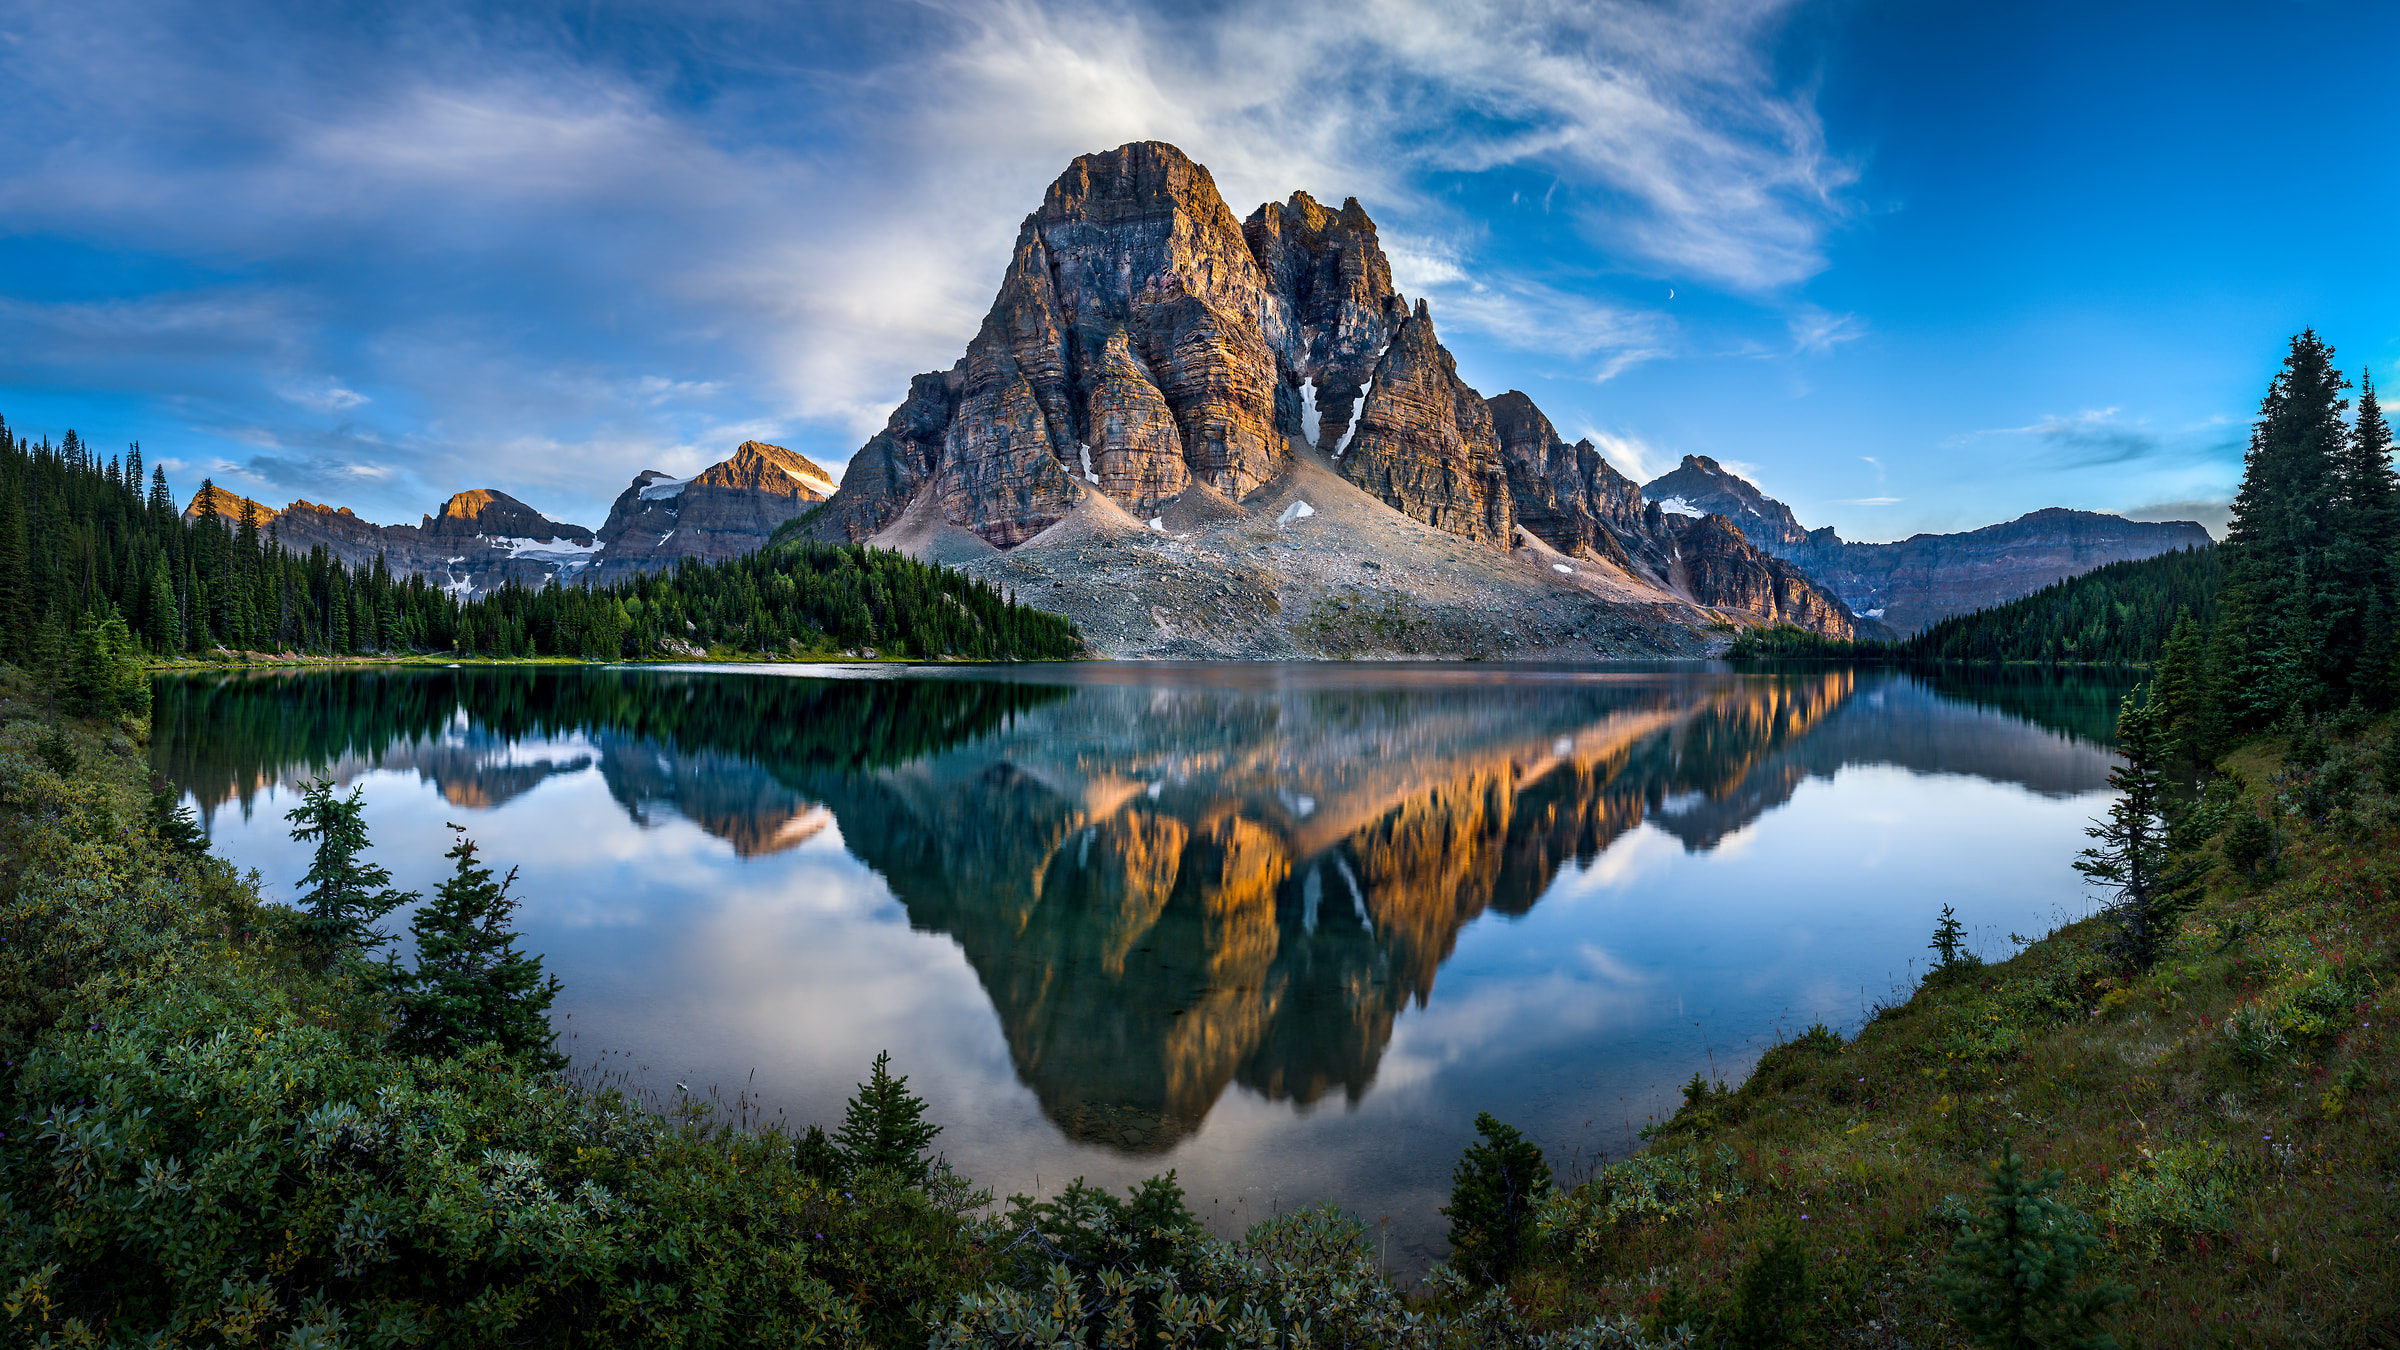 339 megapixels! A very high resolution, large-format VAST photo print of a lake with evergreen trees and a large mountain rockface in the foreground; wilderness landscape photograph created by Tim Shields in Sunburst Mountain, British Columbia, Canada